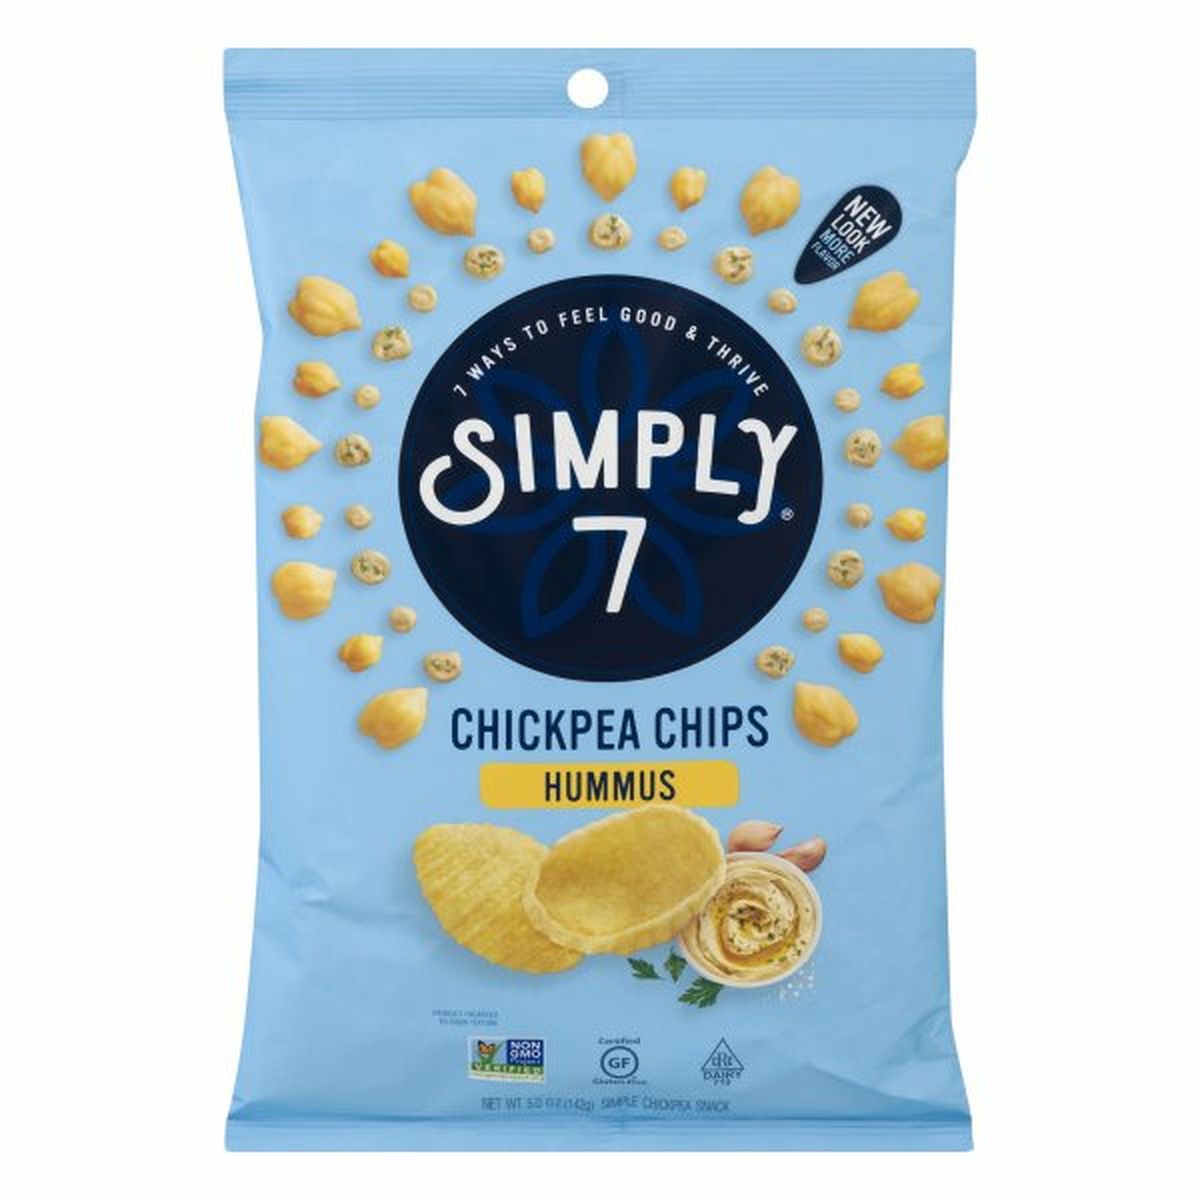 Calories in Simply7 Chickpea Chips, Hummus